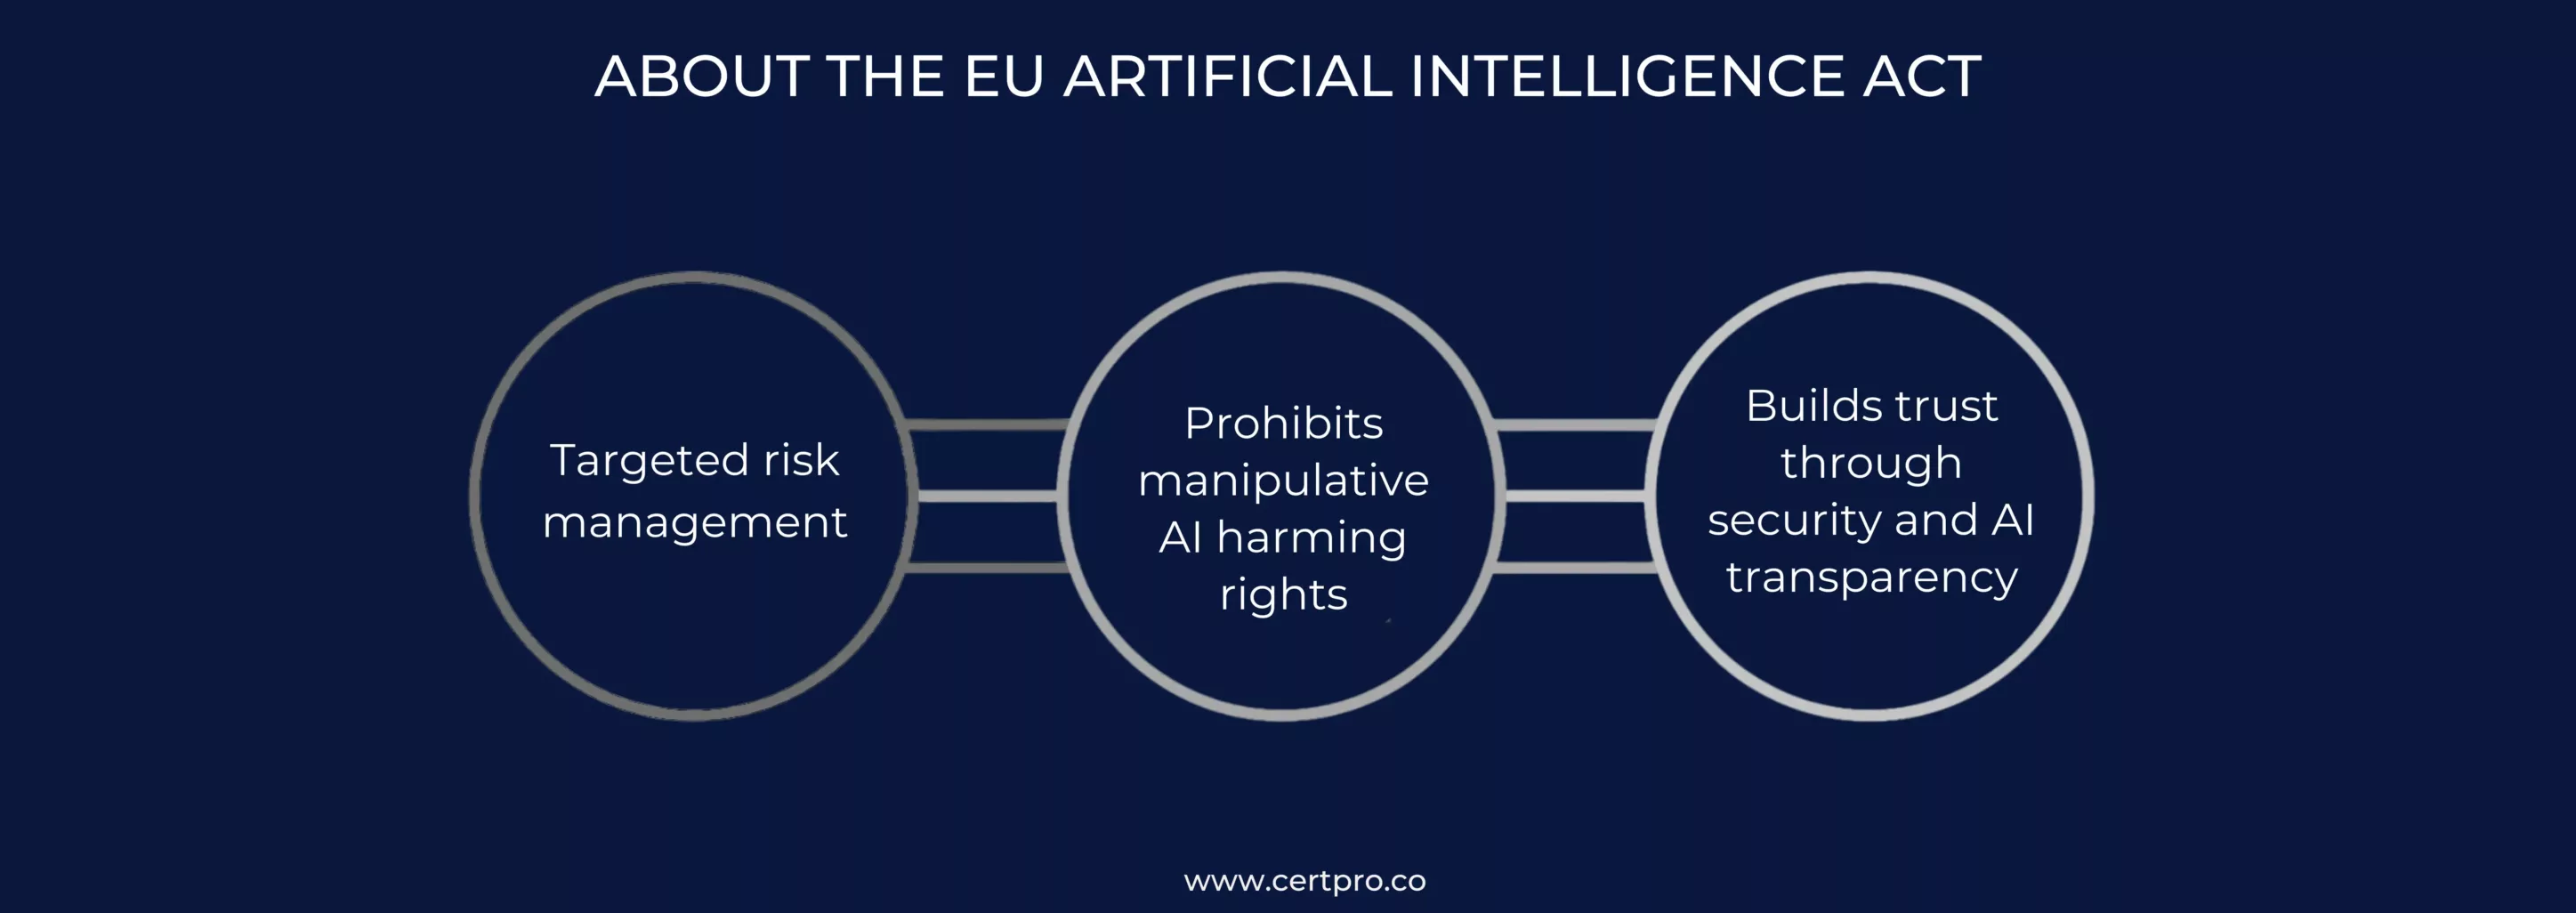 ABOUT THE EU ARTIFICIAL INTELLIGENCE ACT